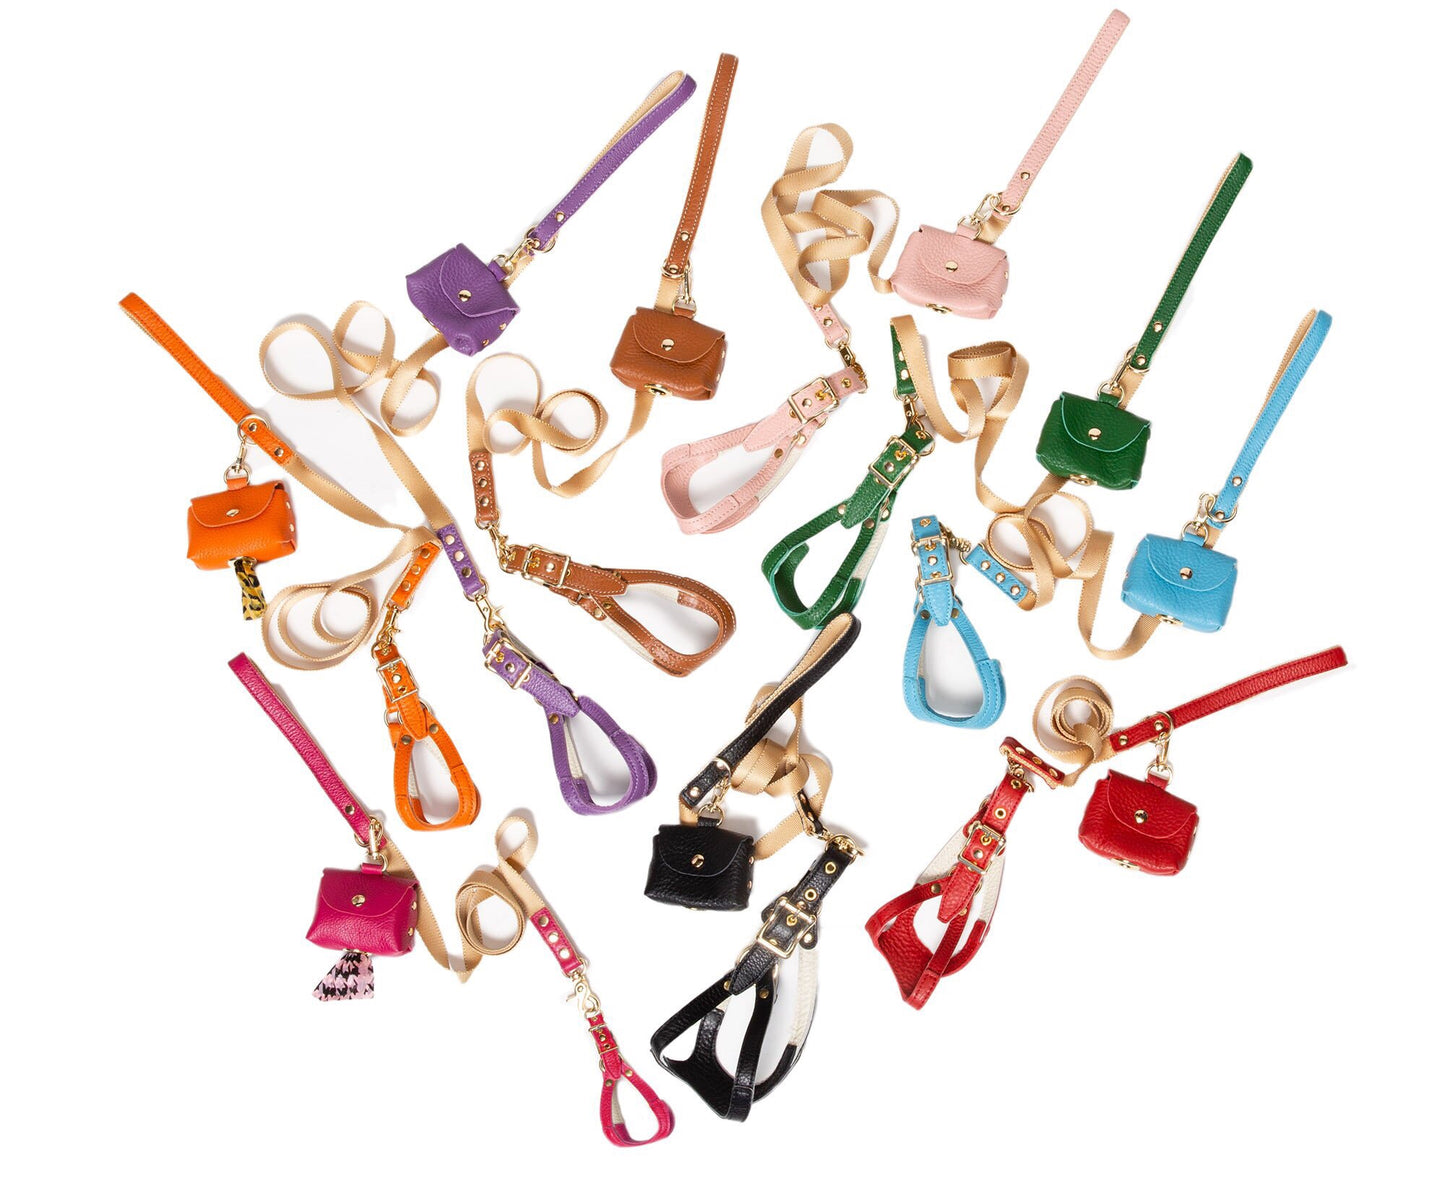 Canine Styles Nylon & Leather Trim Dog Lead - 10 Color Options